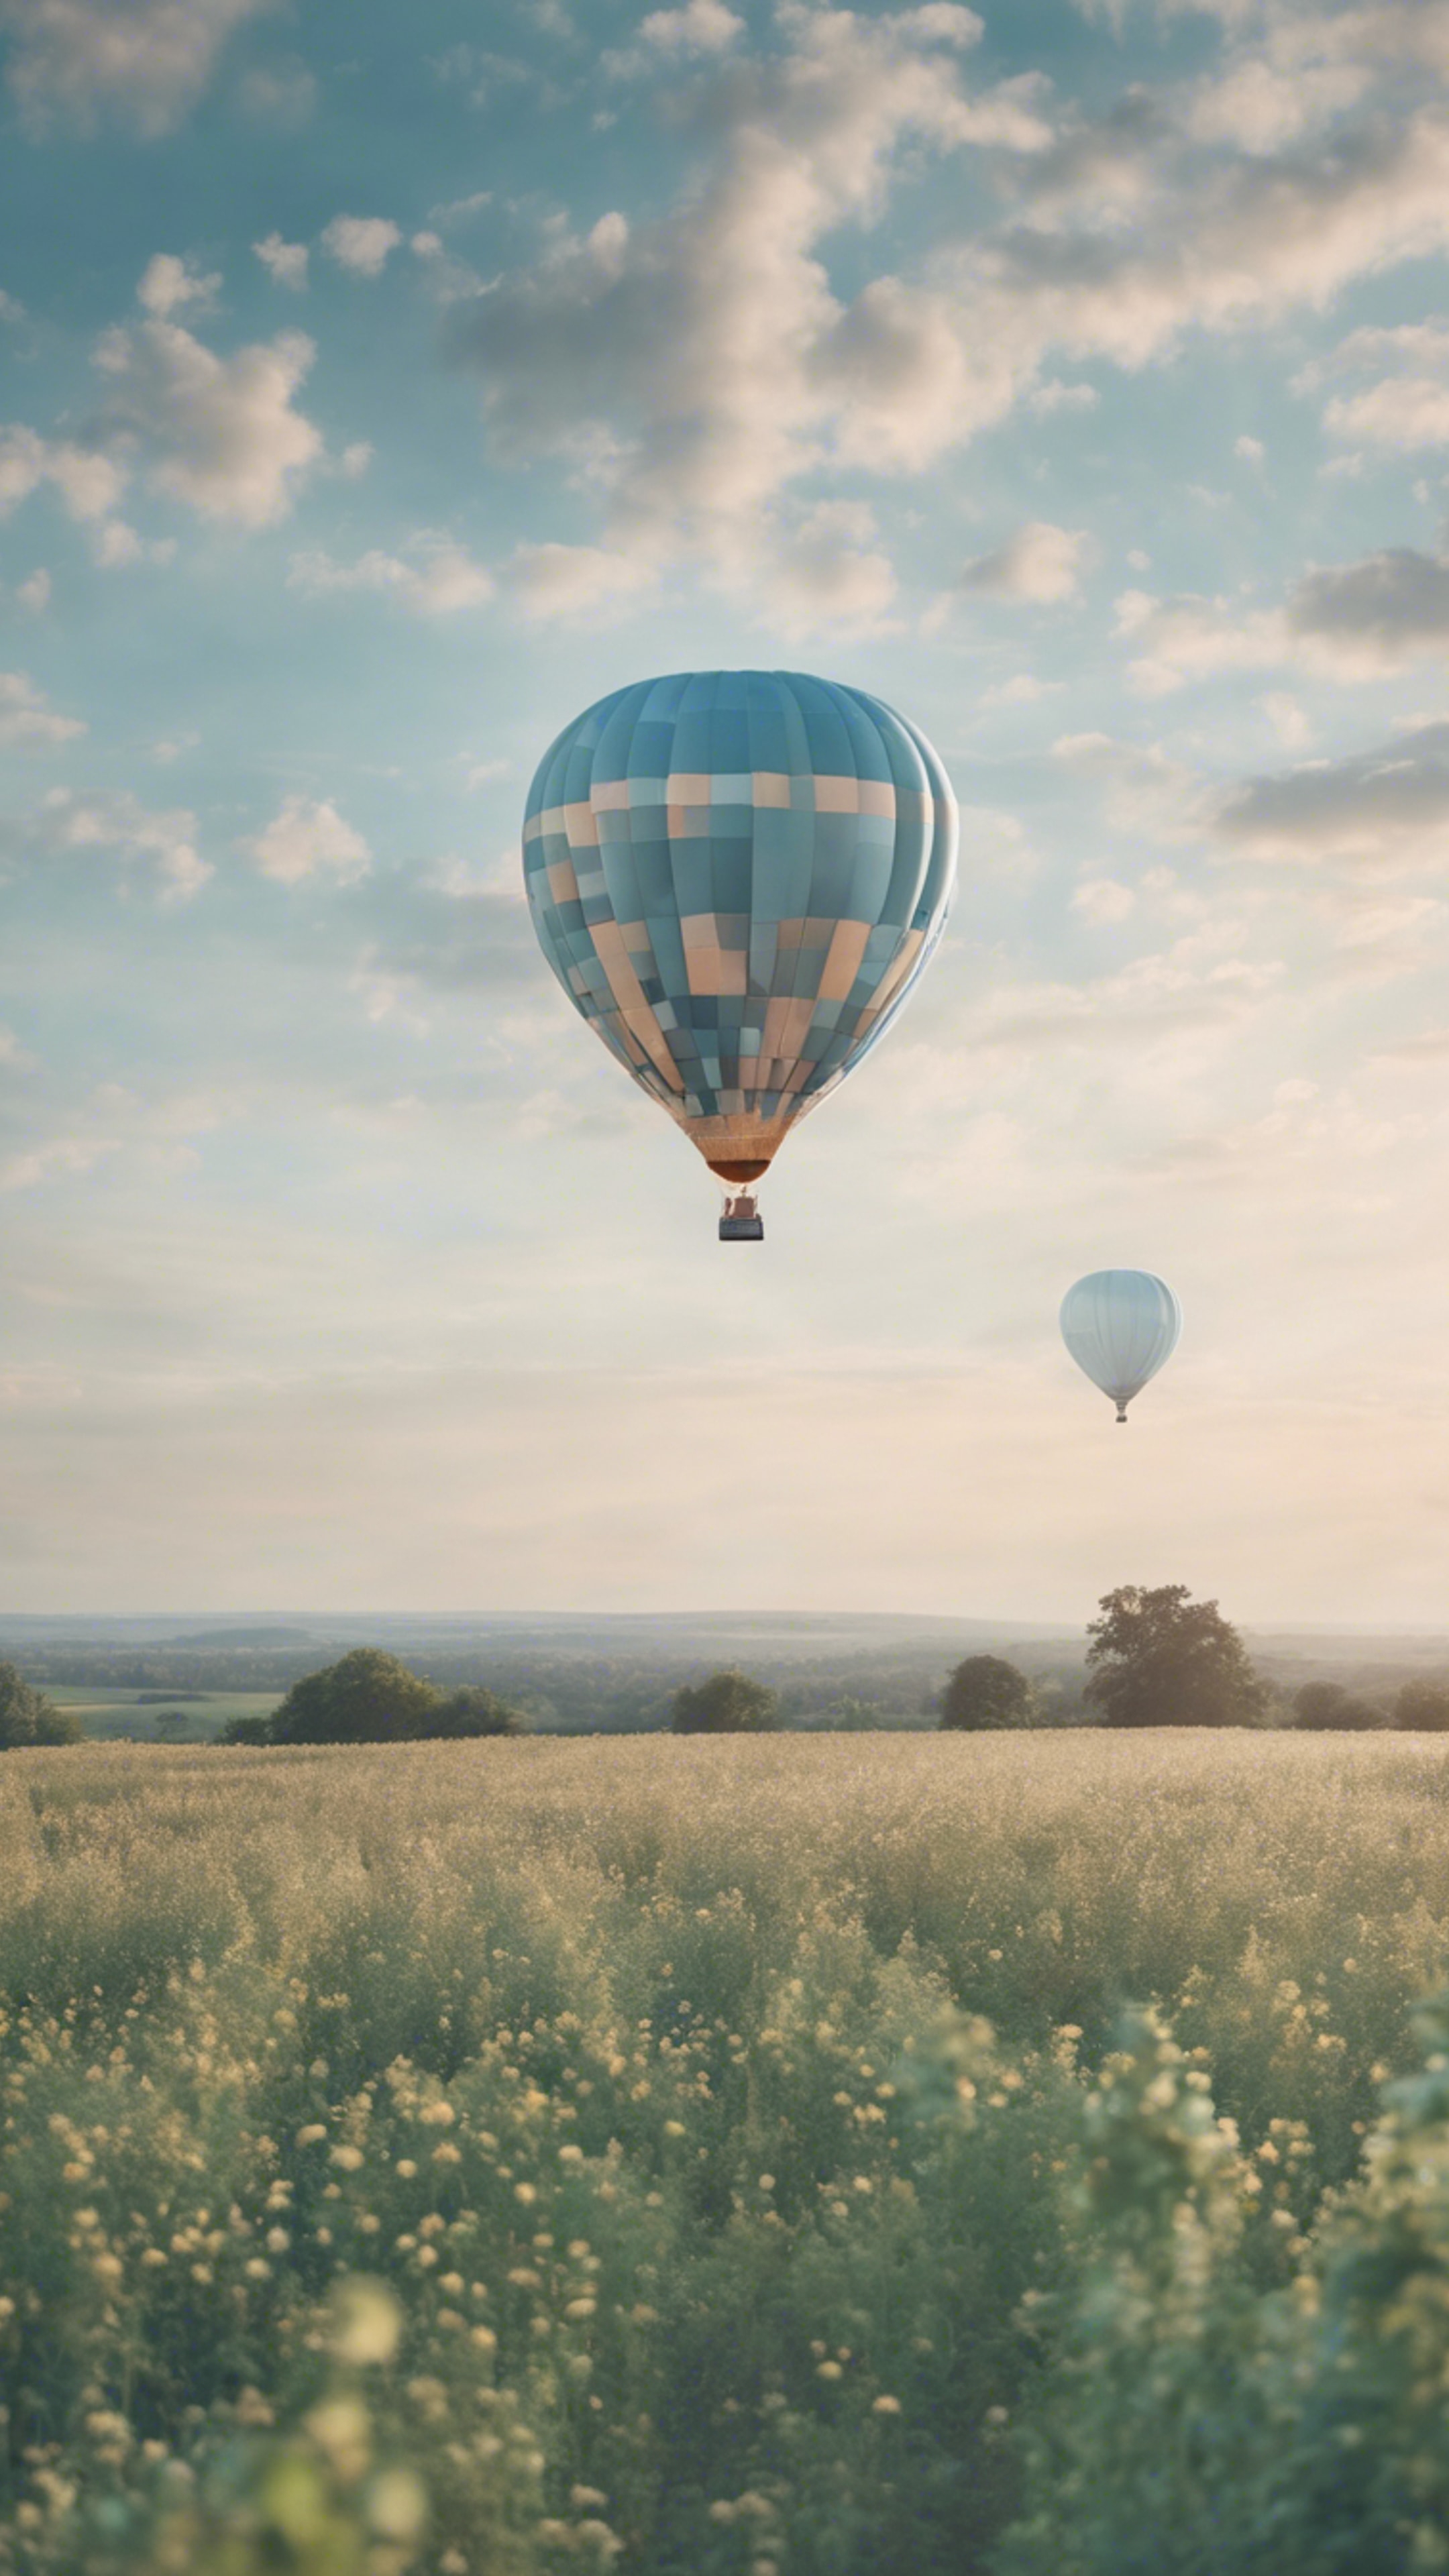 A pastel blue hot air balloon floating serenely above a patchwork field. Обои[b19c340976c044f4b3c6]